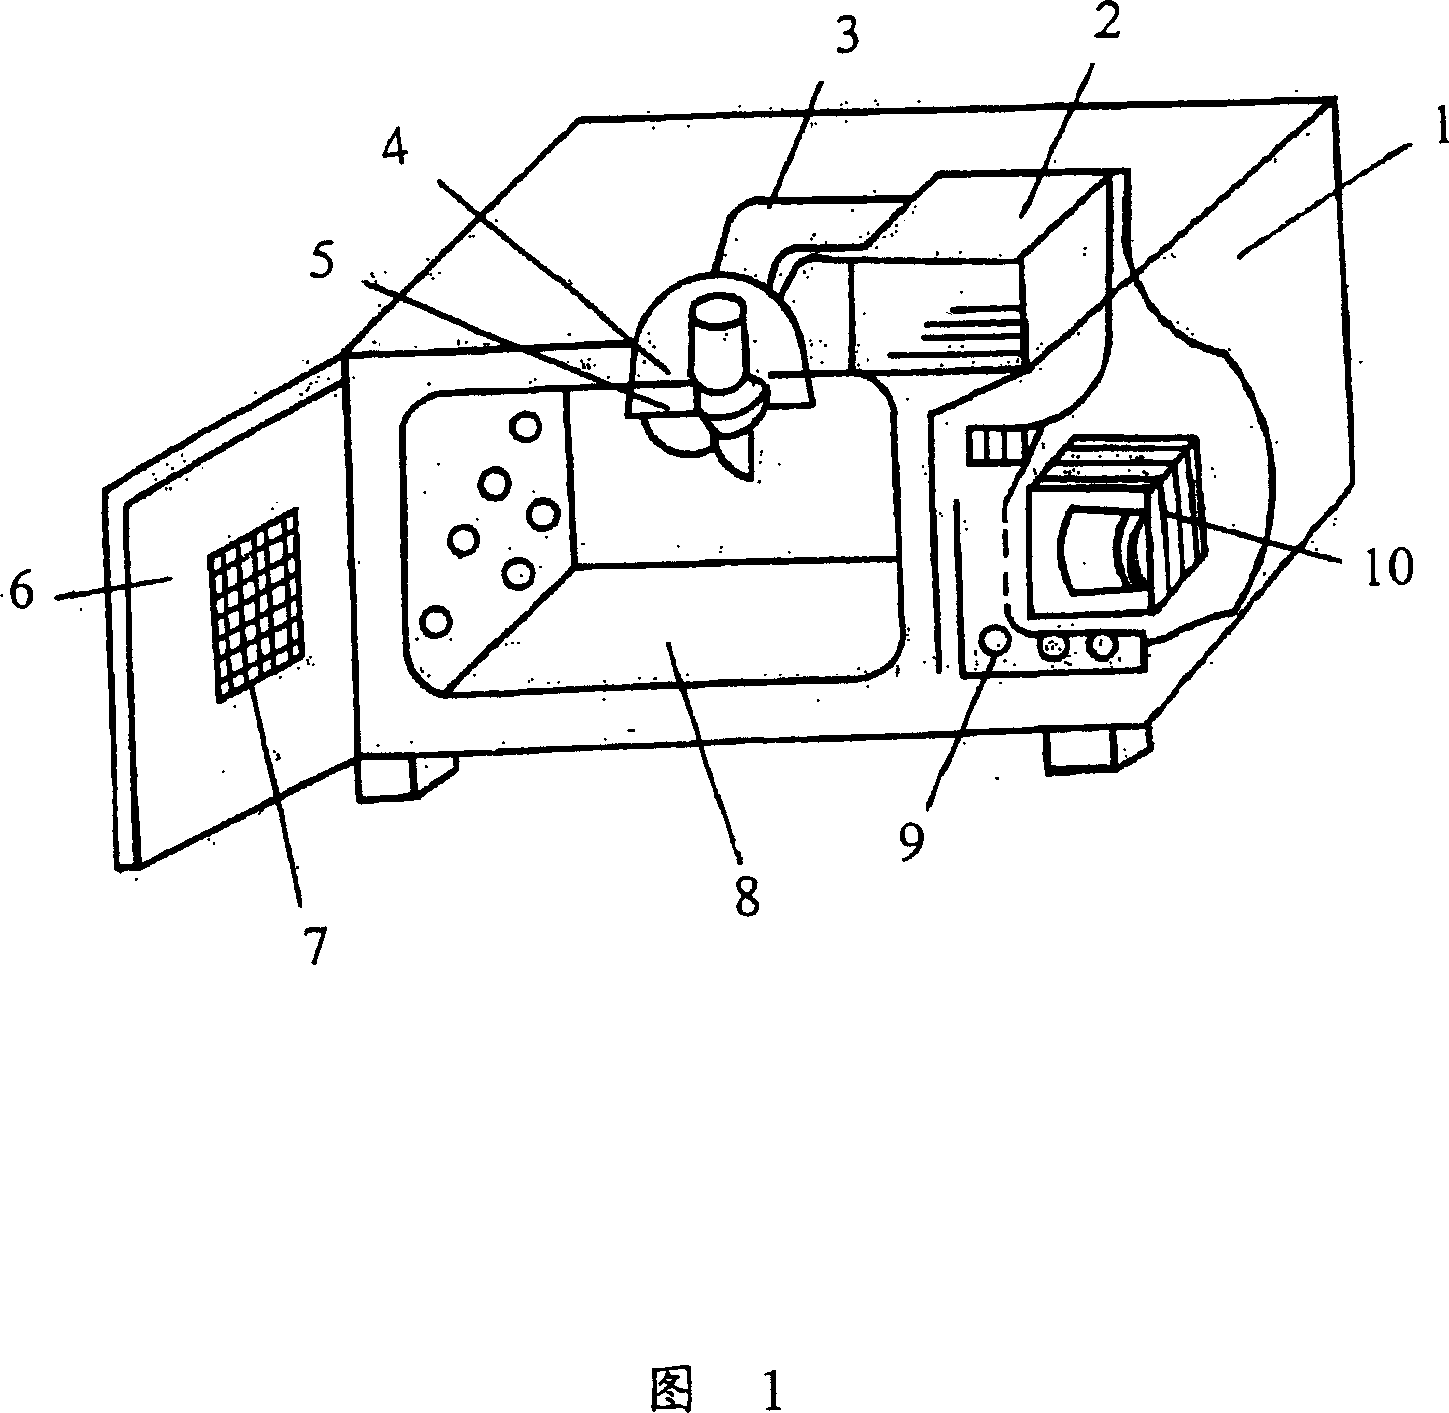 Feedforward control method for door opened at working station of microwave oven